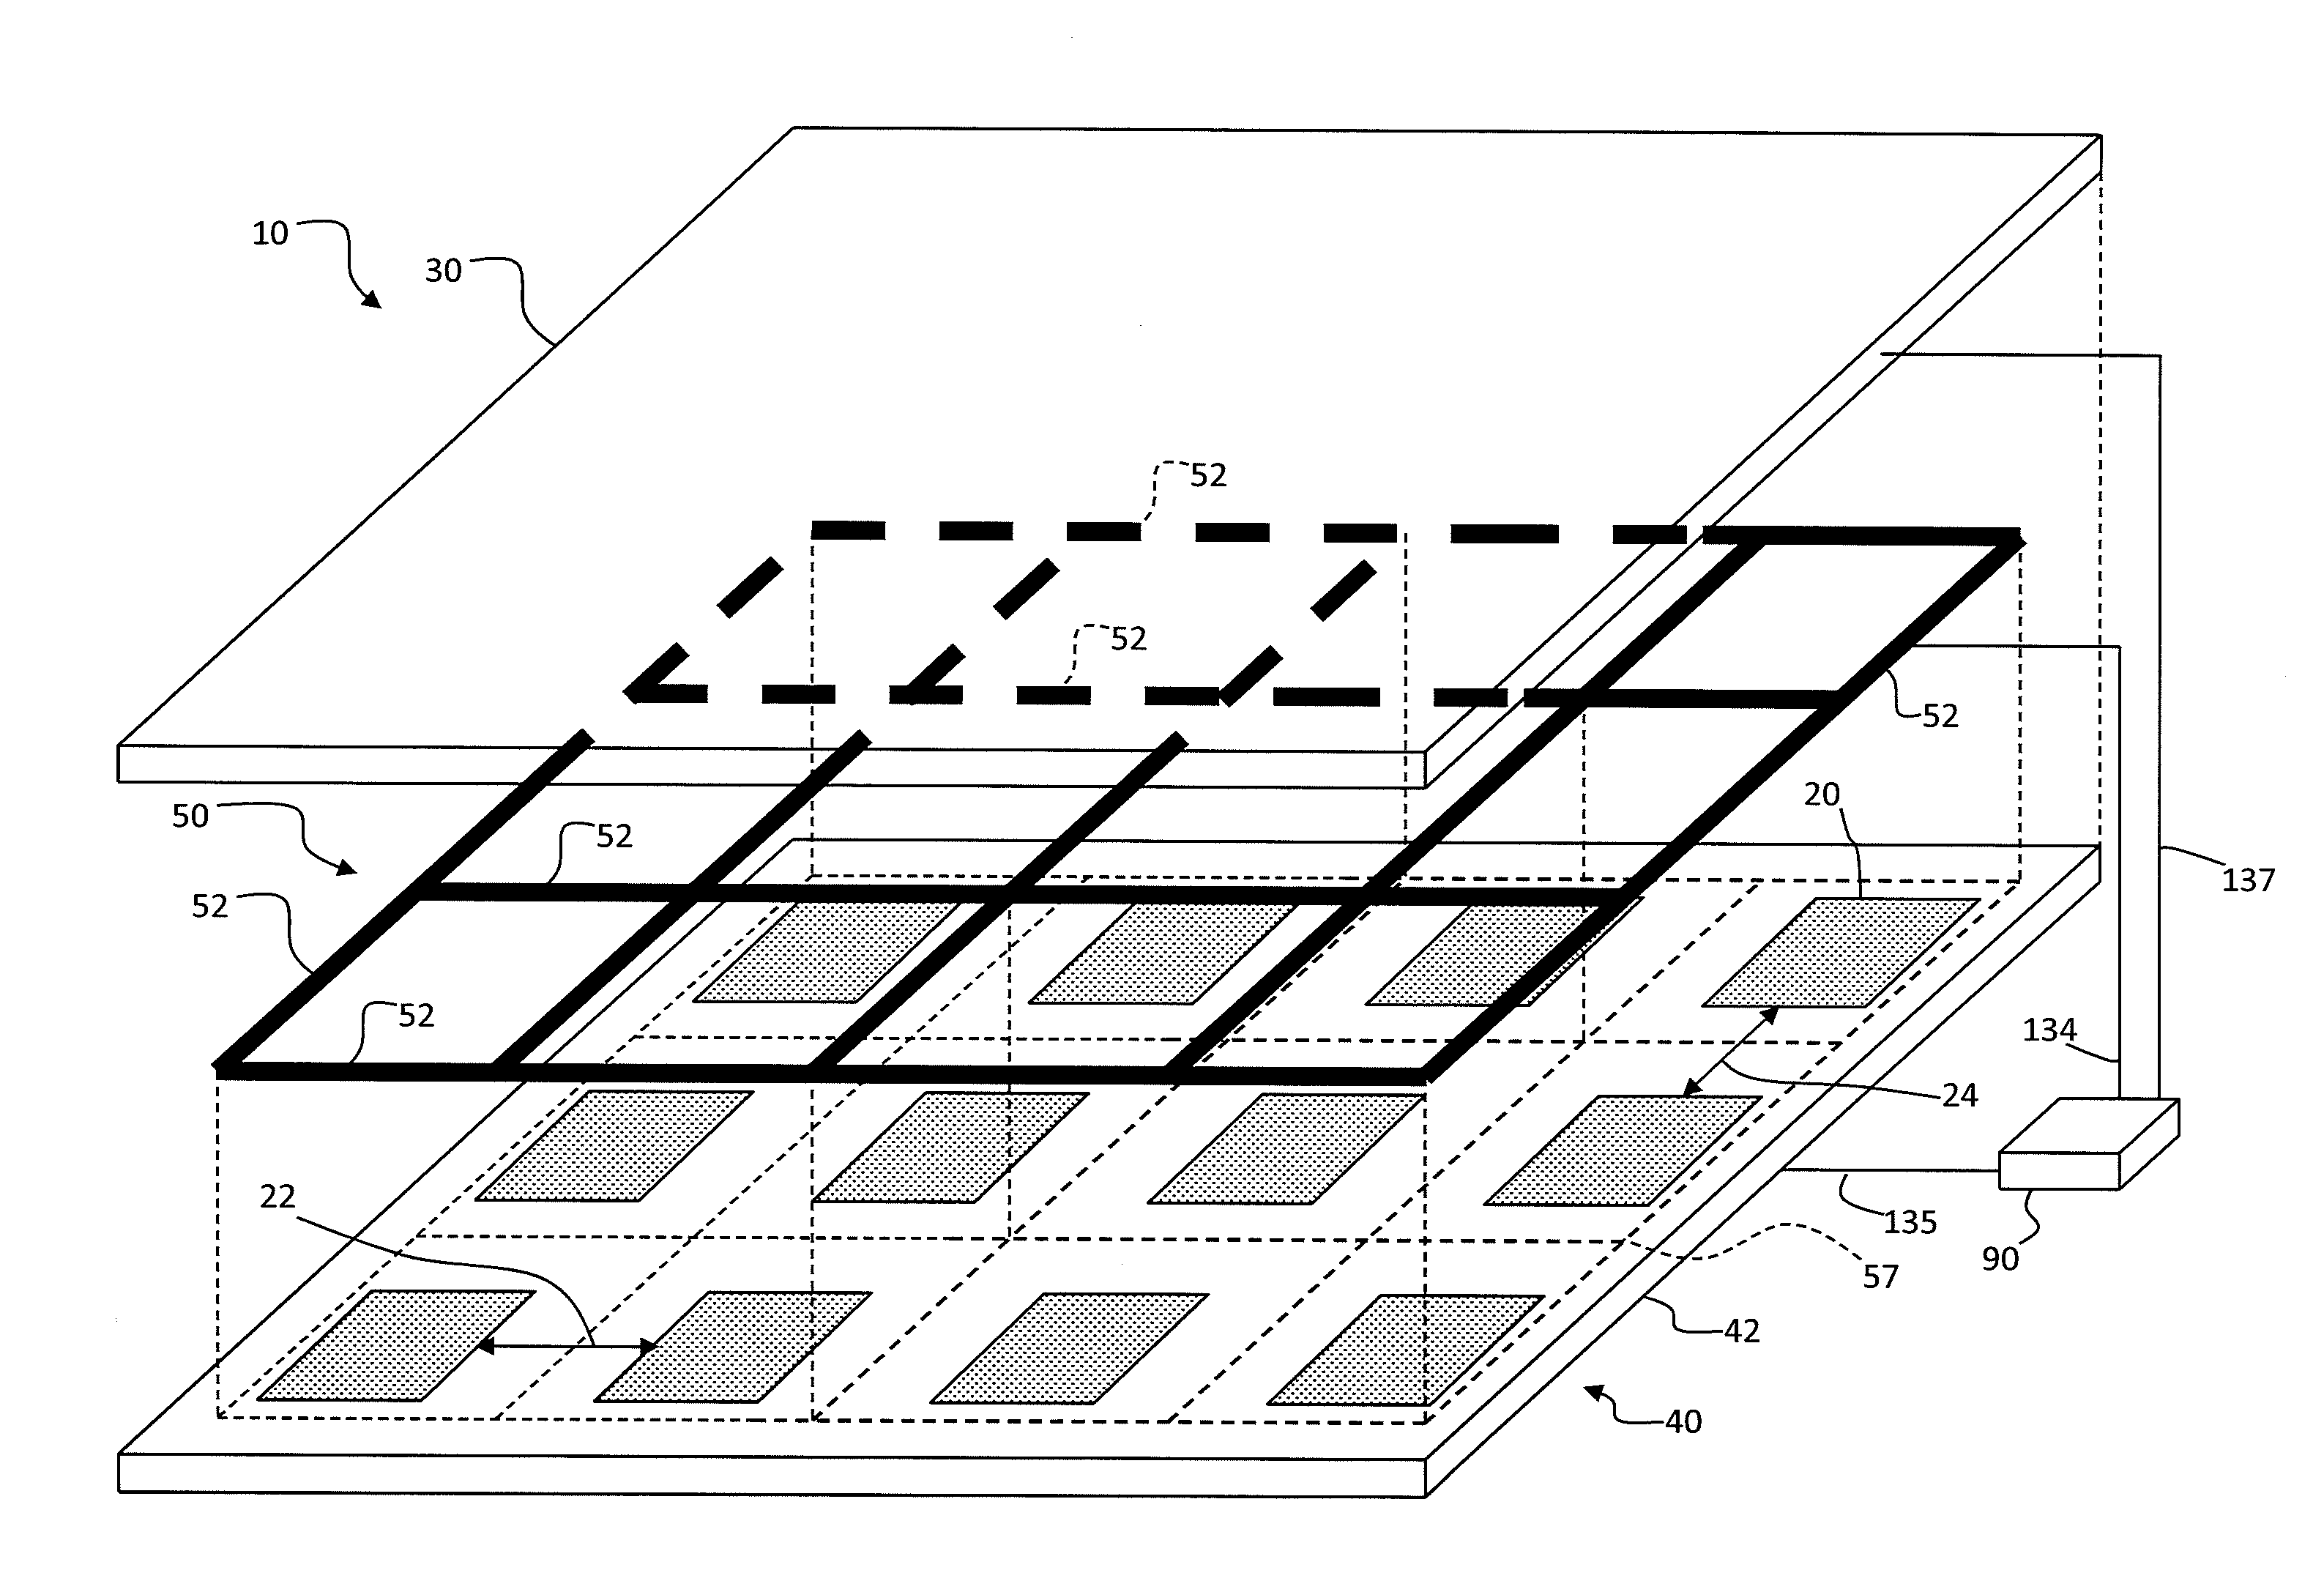 Display apparatus with pixel-aligned ground mesh